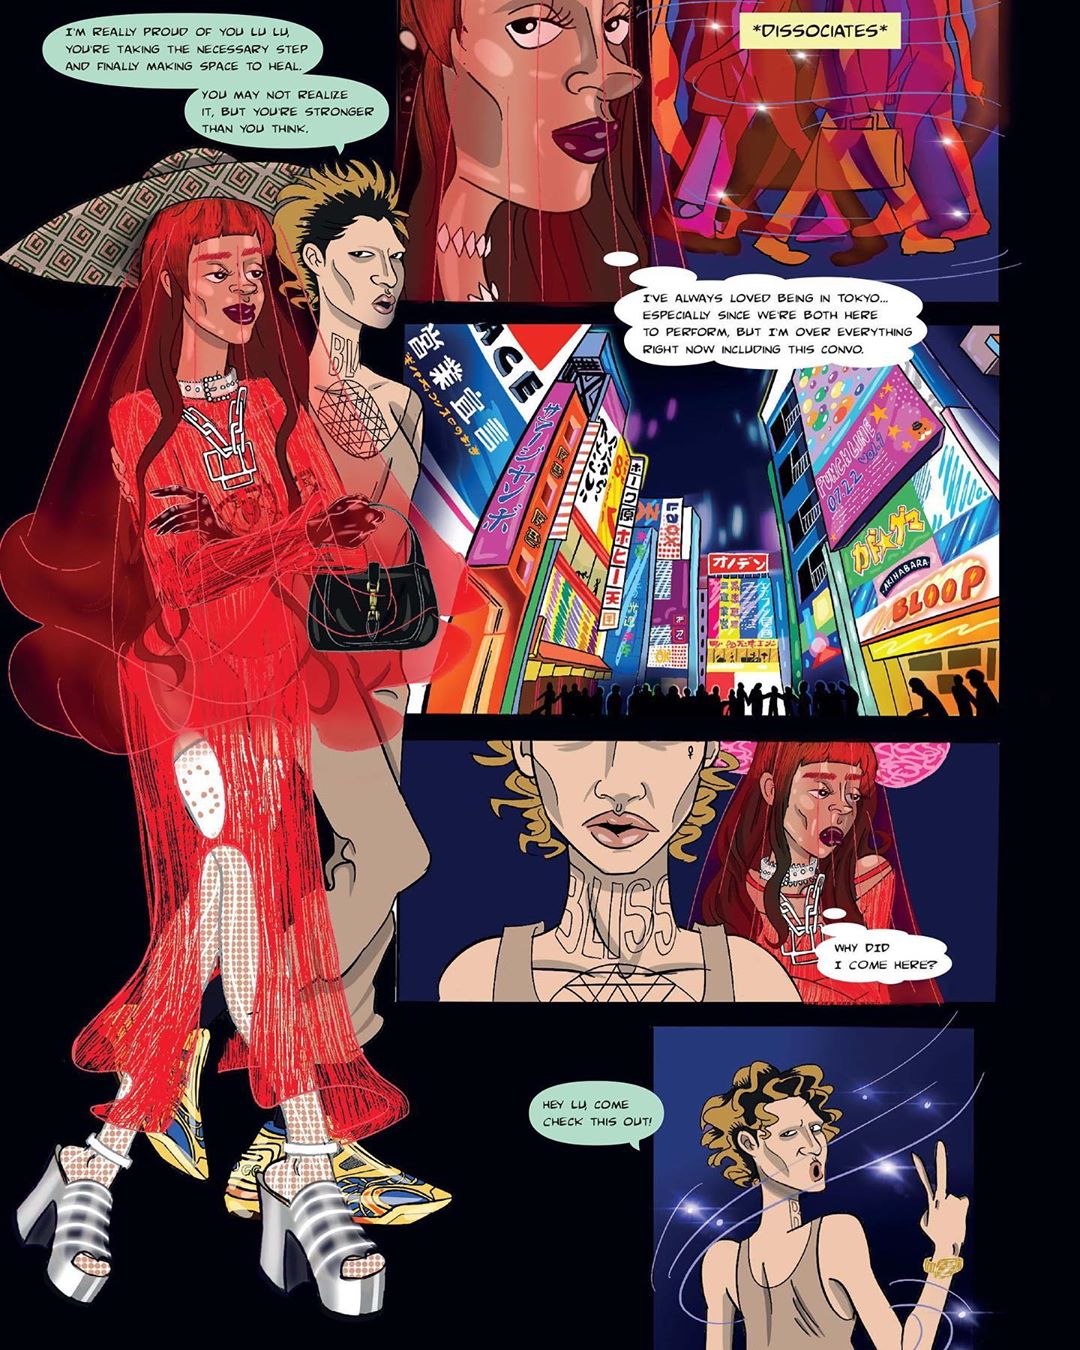 Gucci - #KelseyLu @iamkelseylu is the protagonist of a comic book created in partnership with @kaleidoscopemagazine. The experimental cellist and songwriter is depicted pursuing her dreams to become a...